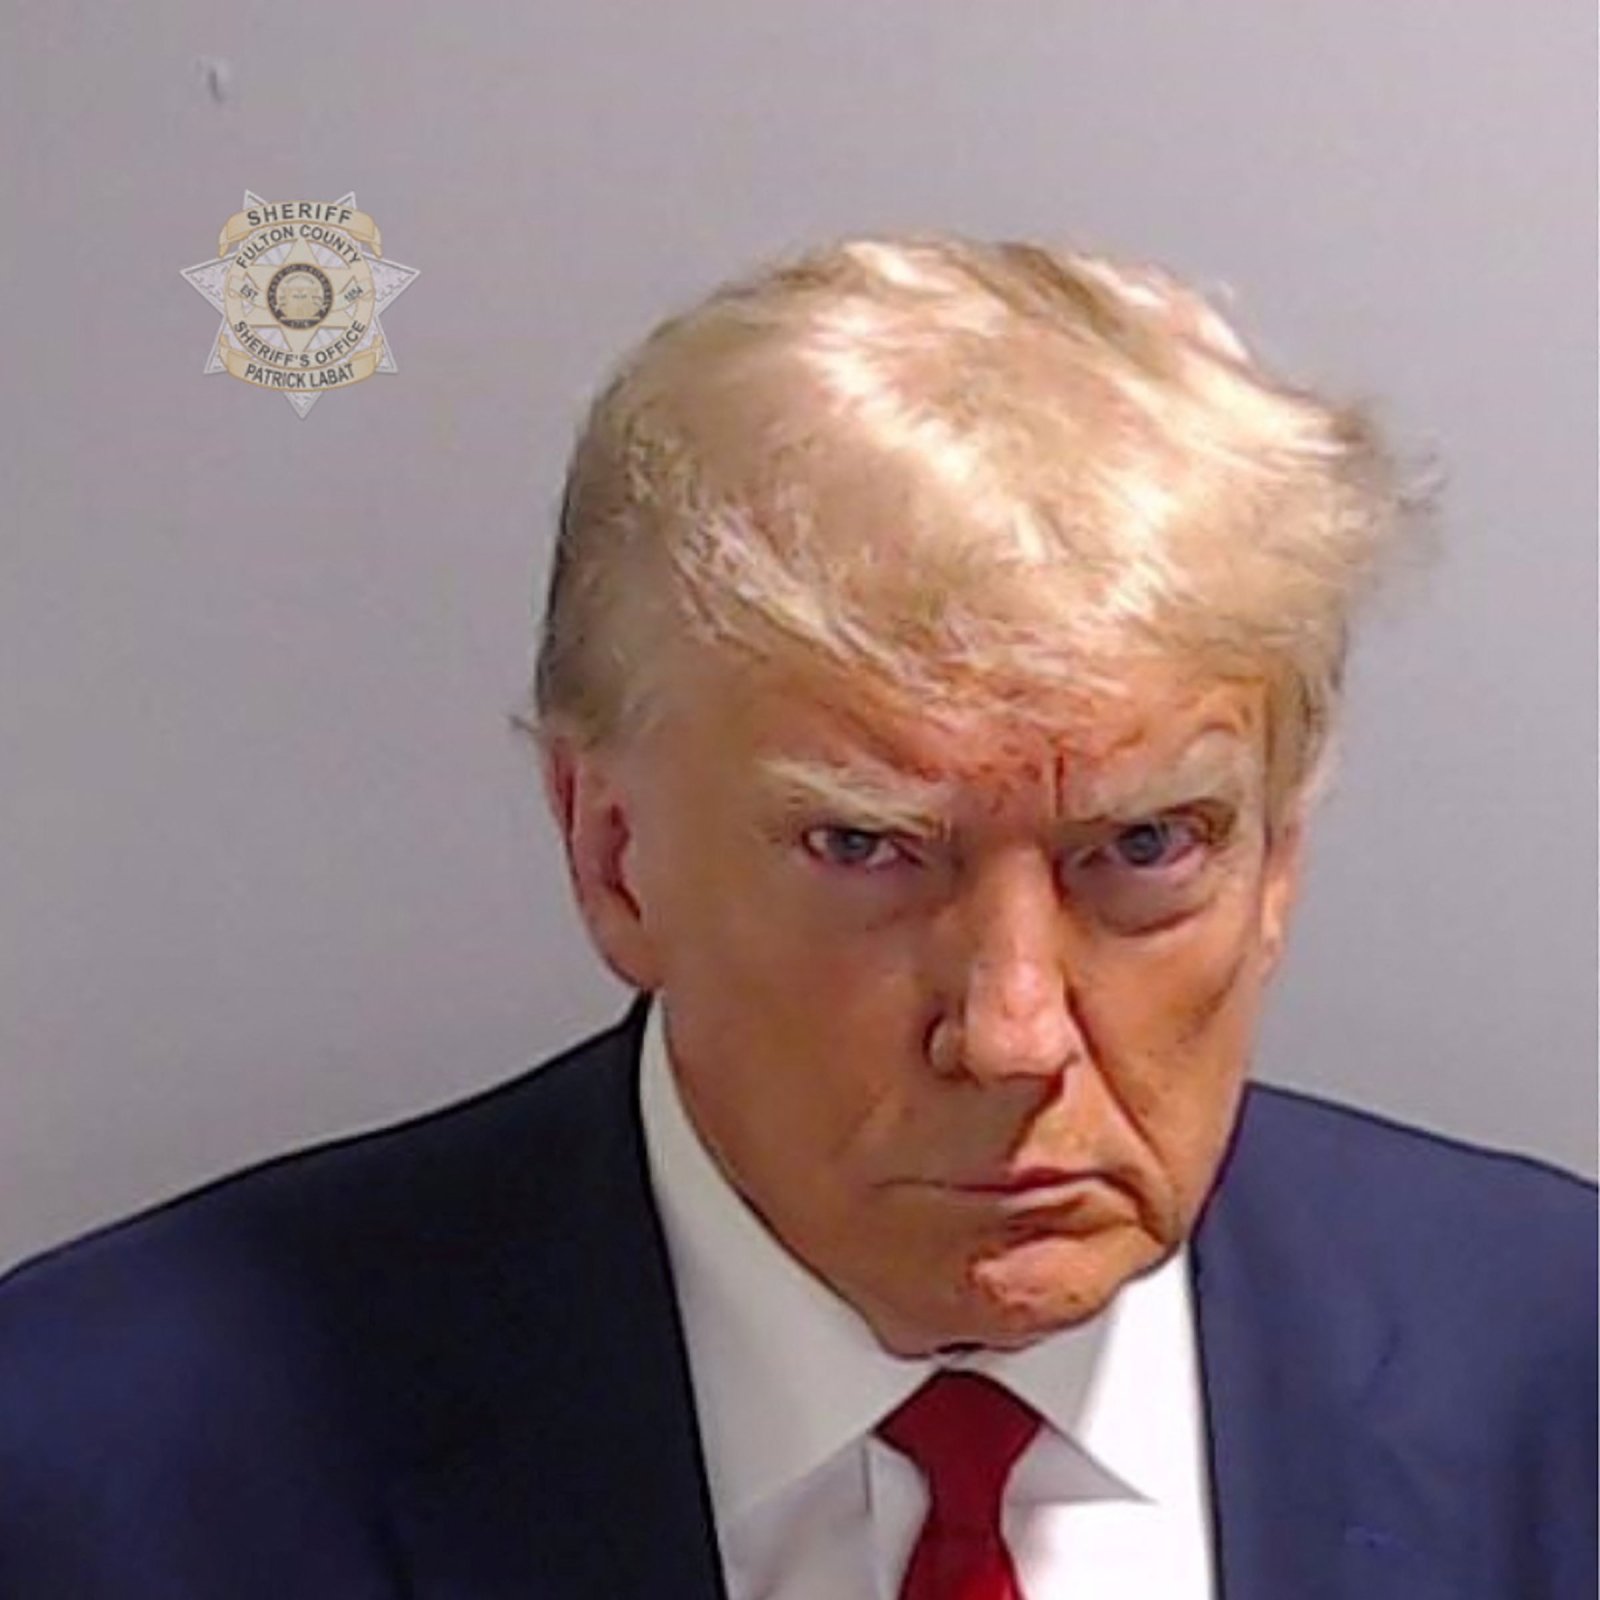 The Fulton County Sheriff's Office has released a police booking mugshot featuring former President Donald Trump. source : https://time.com/6308324/donald-trump-mug-shot-georgia/